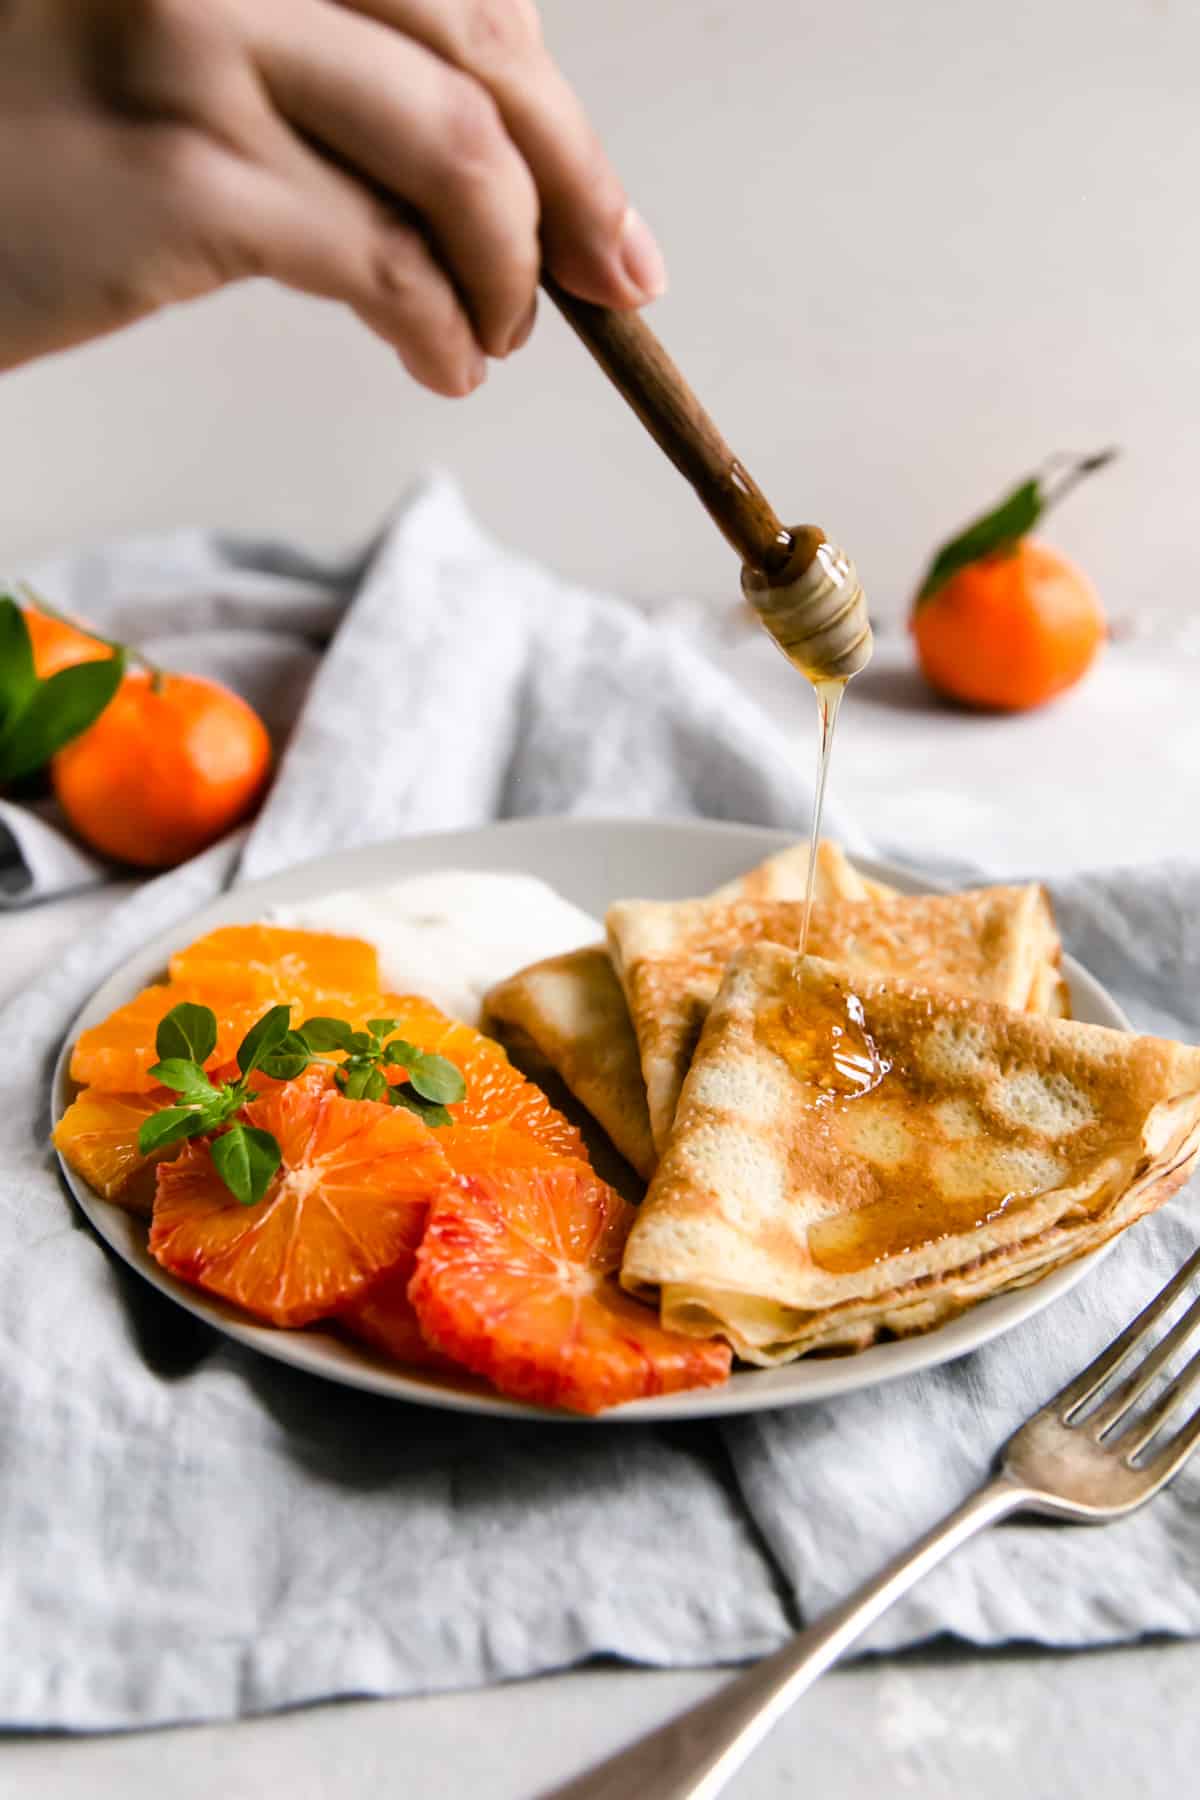 a person drizzling some homey over a plate with crepes and citrus